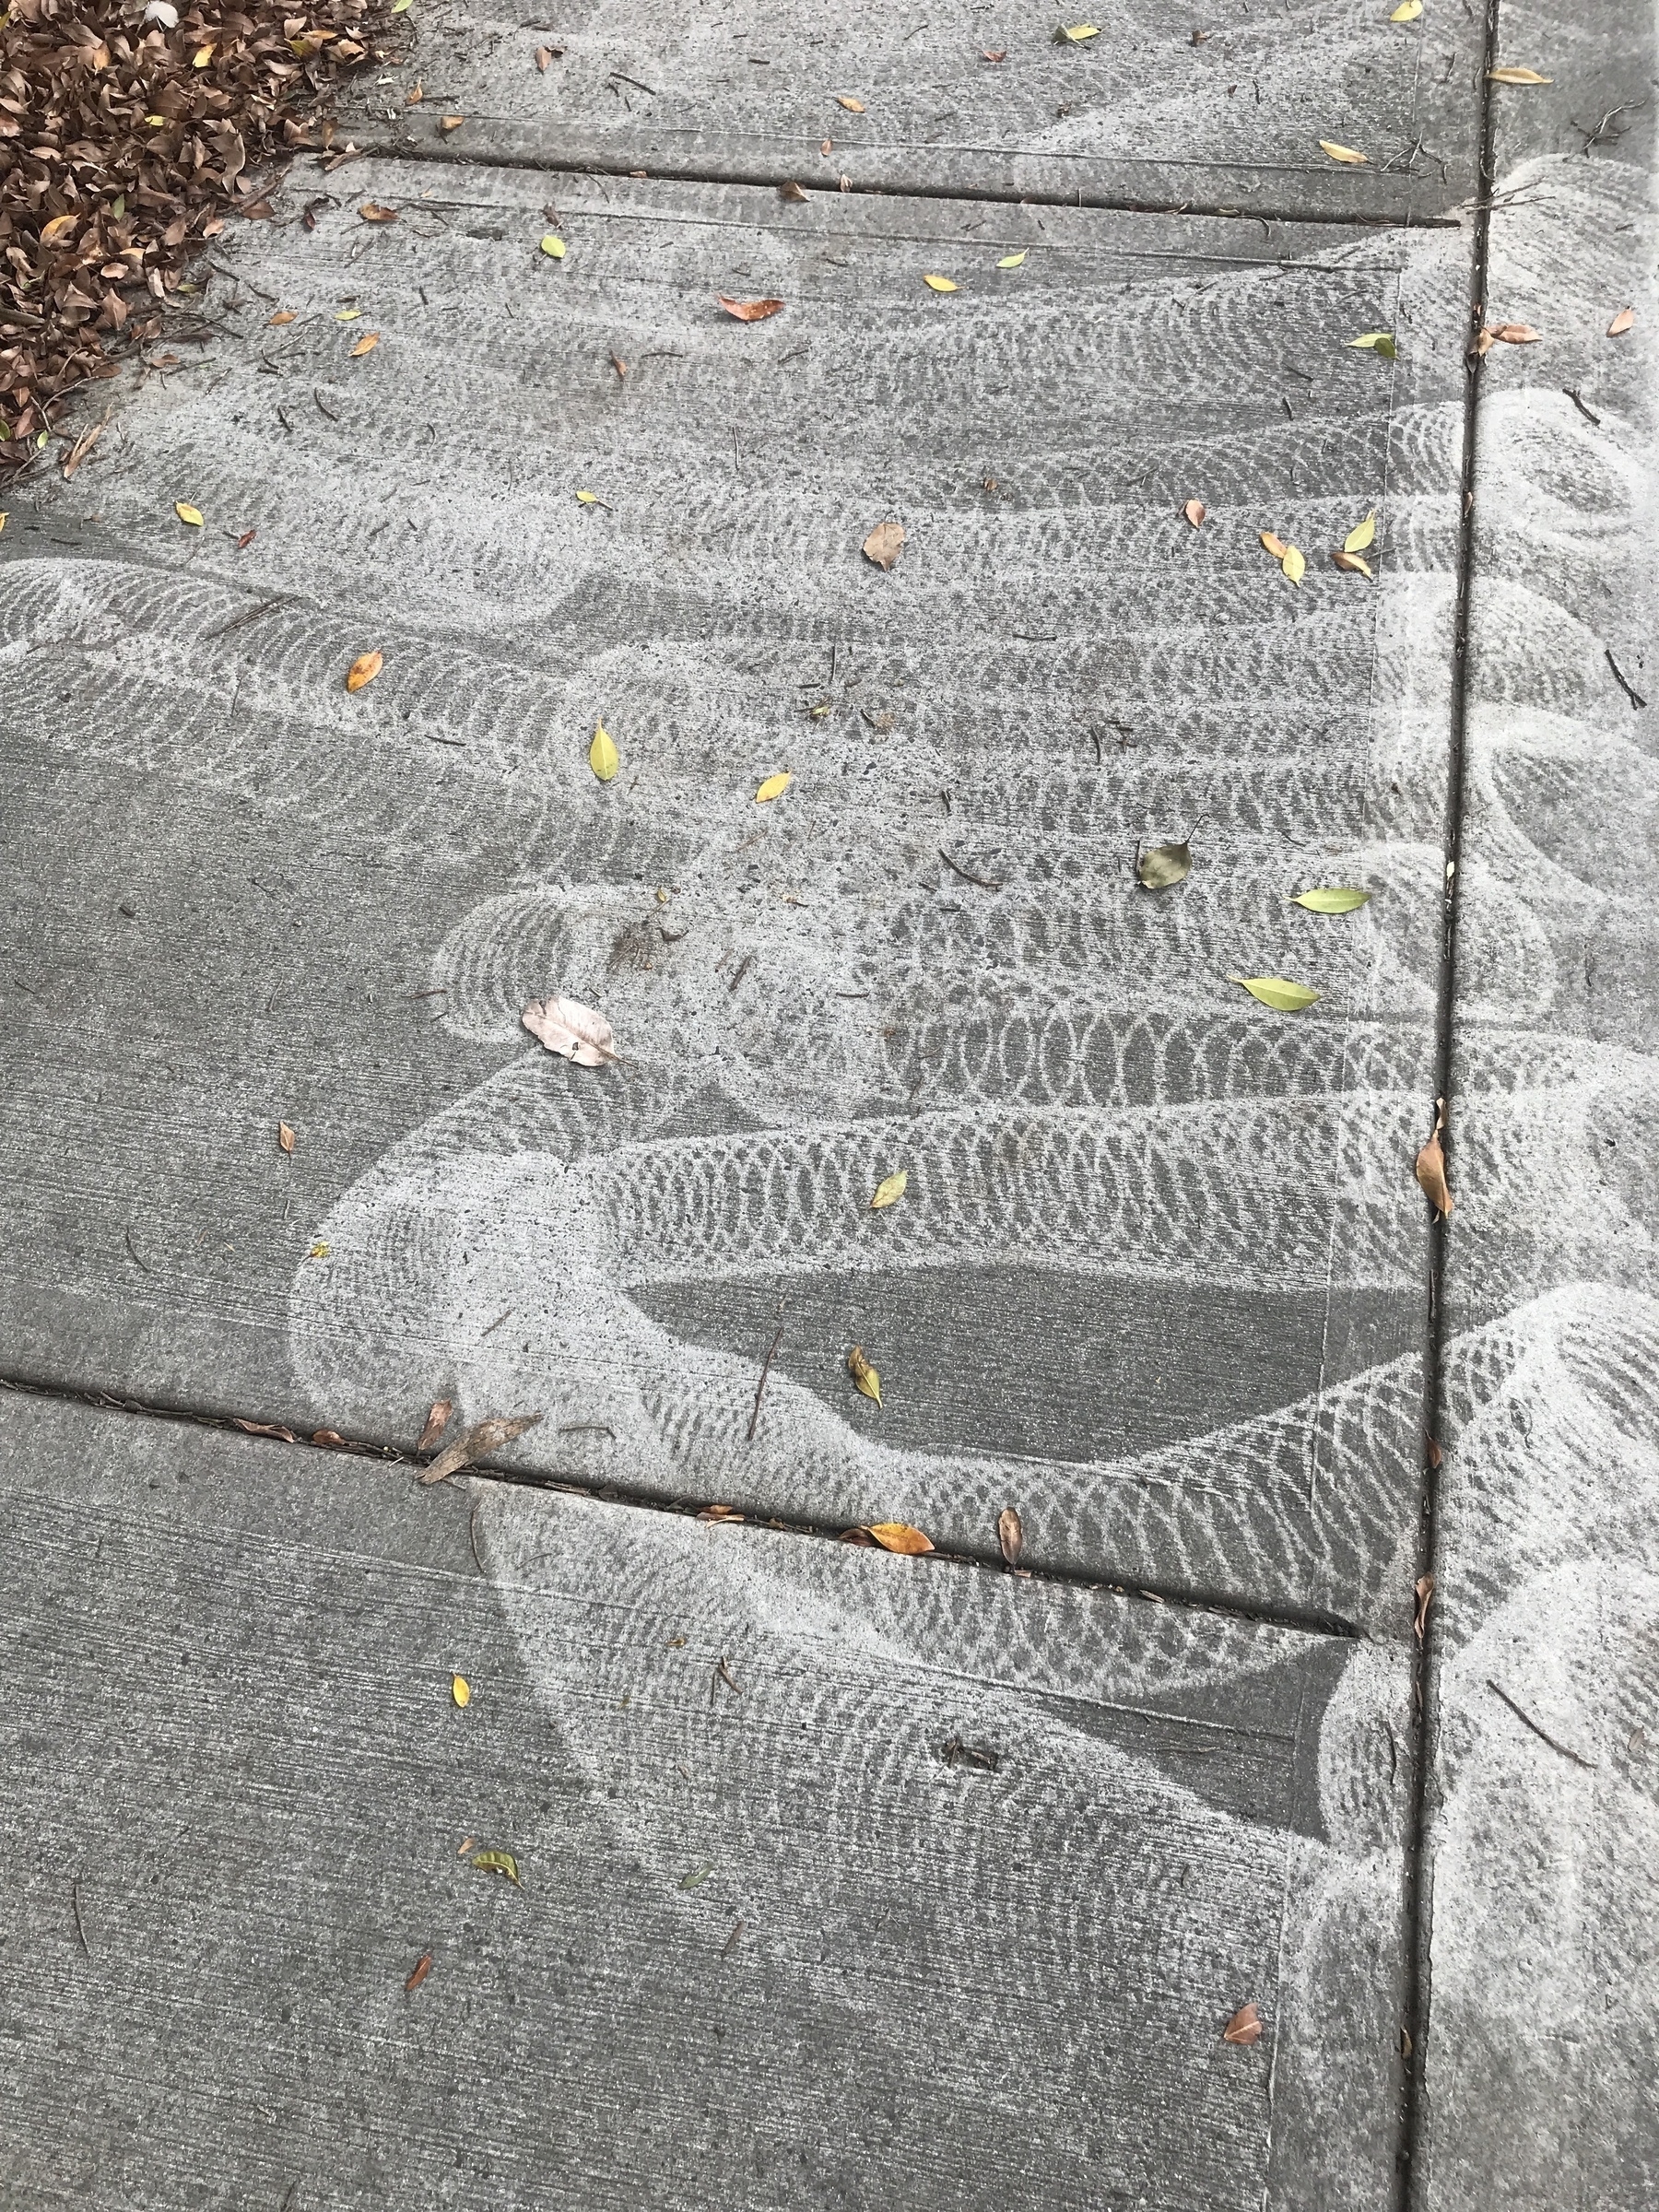 A grey footpath is scored across with broad, pale marks that look like three-dimensional cylinders. The shapes are composed of regularly-spaced, spiral lines, and the end of each shape forms an angled cross-section of a circle.